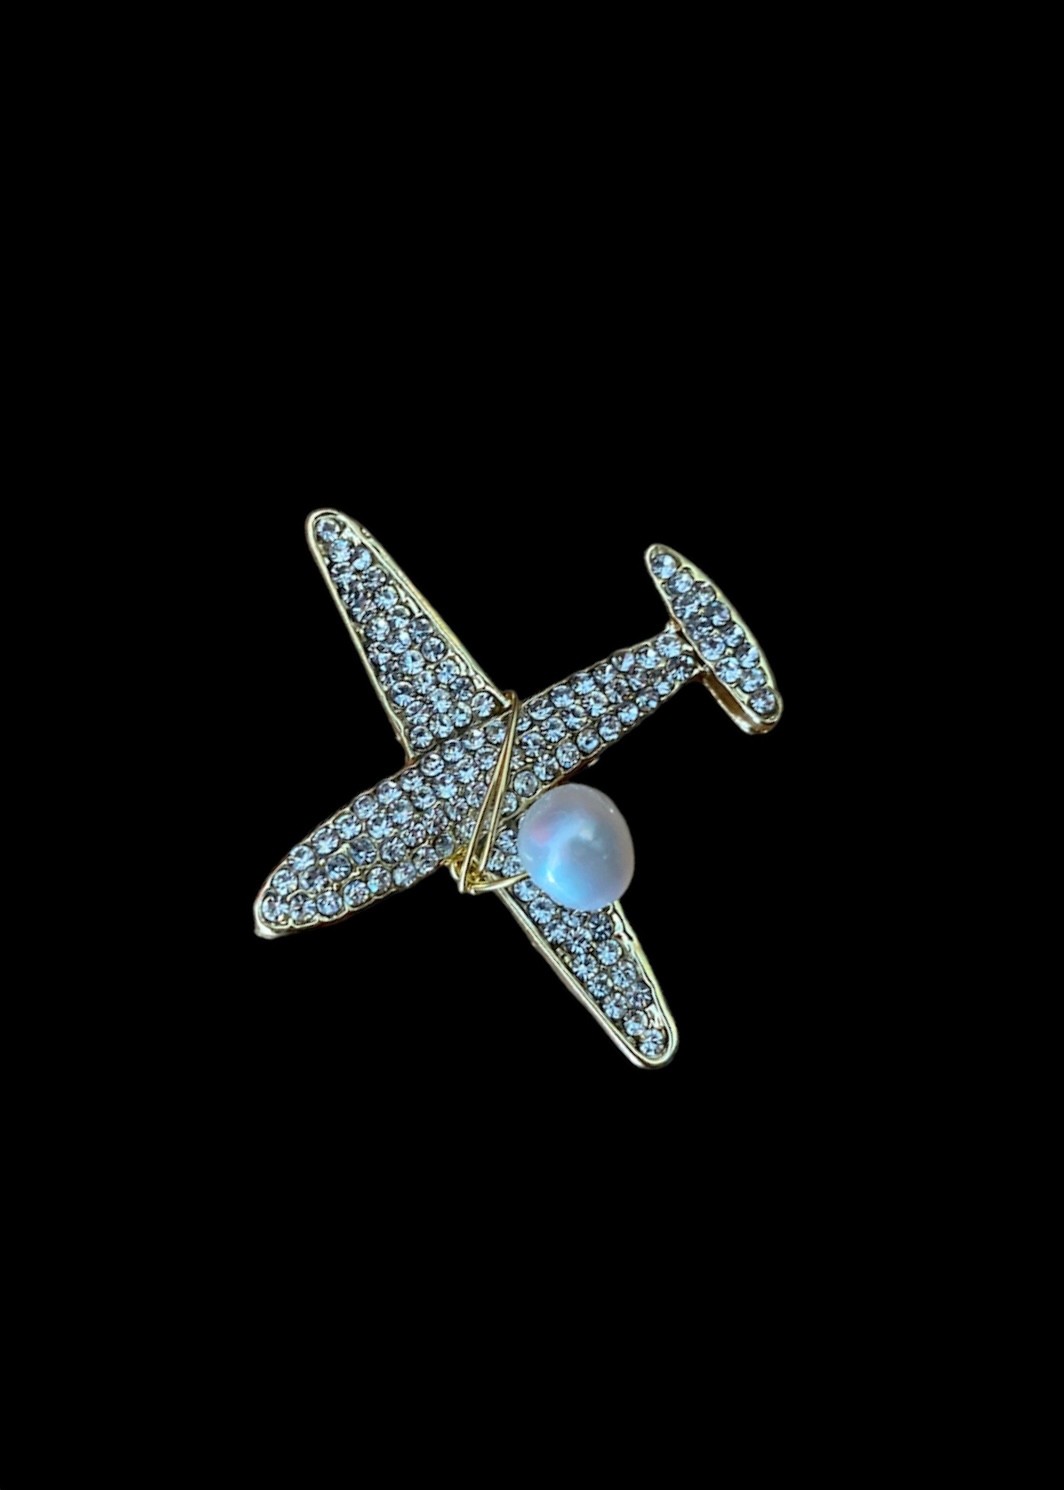 Airplane brooch with rhinestones and a real pearl 